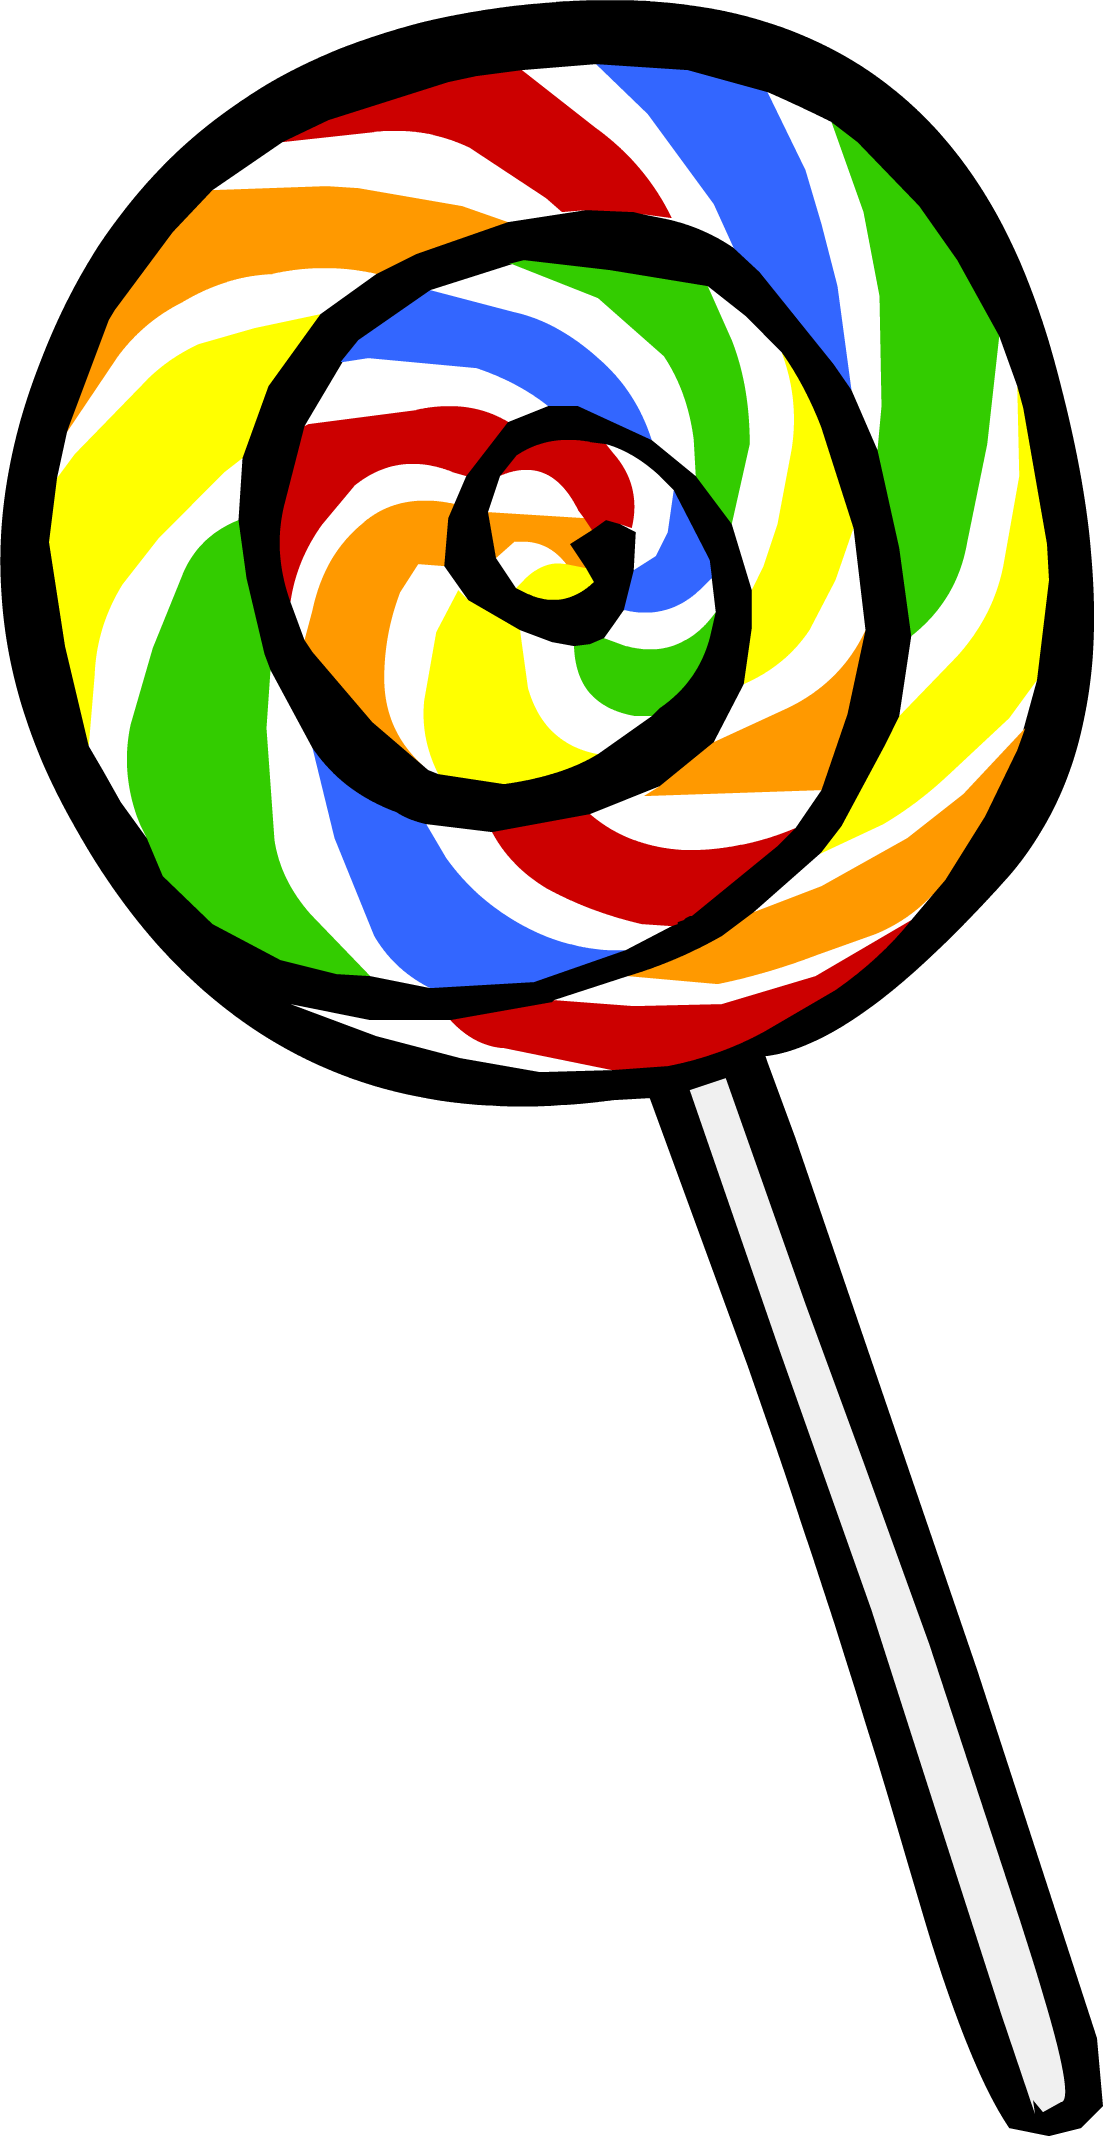 Download PNG image - Candy Lollipop PNG Image 